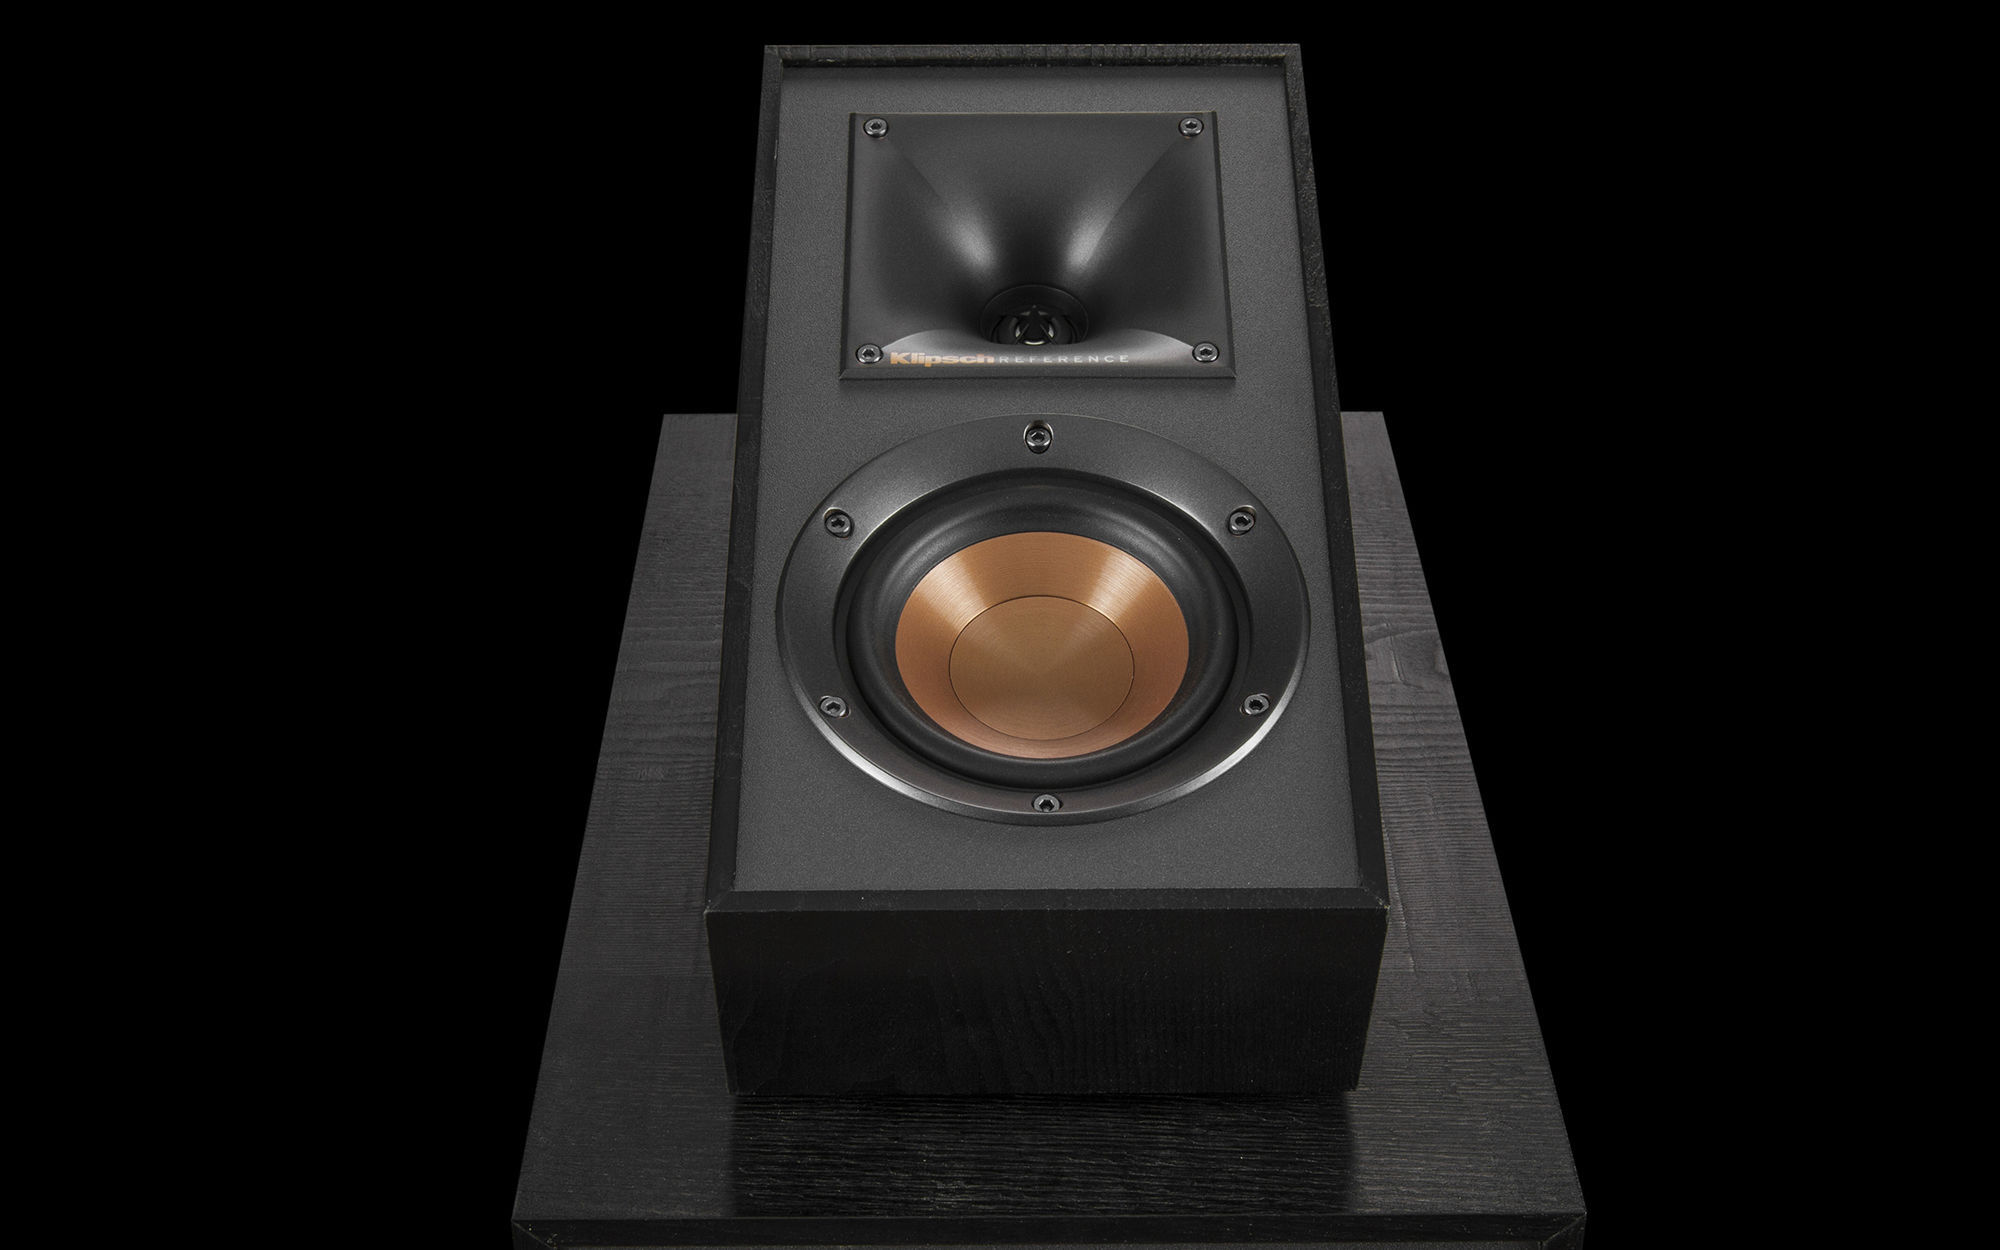 Loa Klipsch R-41SA | Loa Surround dùng Dolby Atmos | Anh Duy Audio